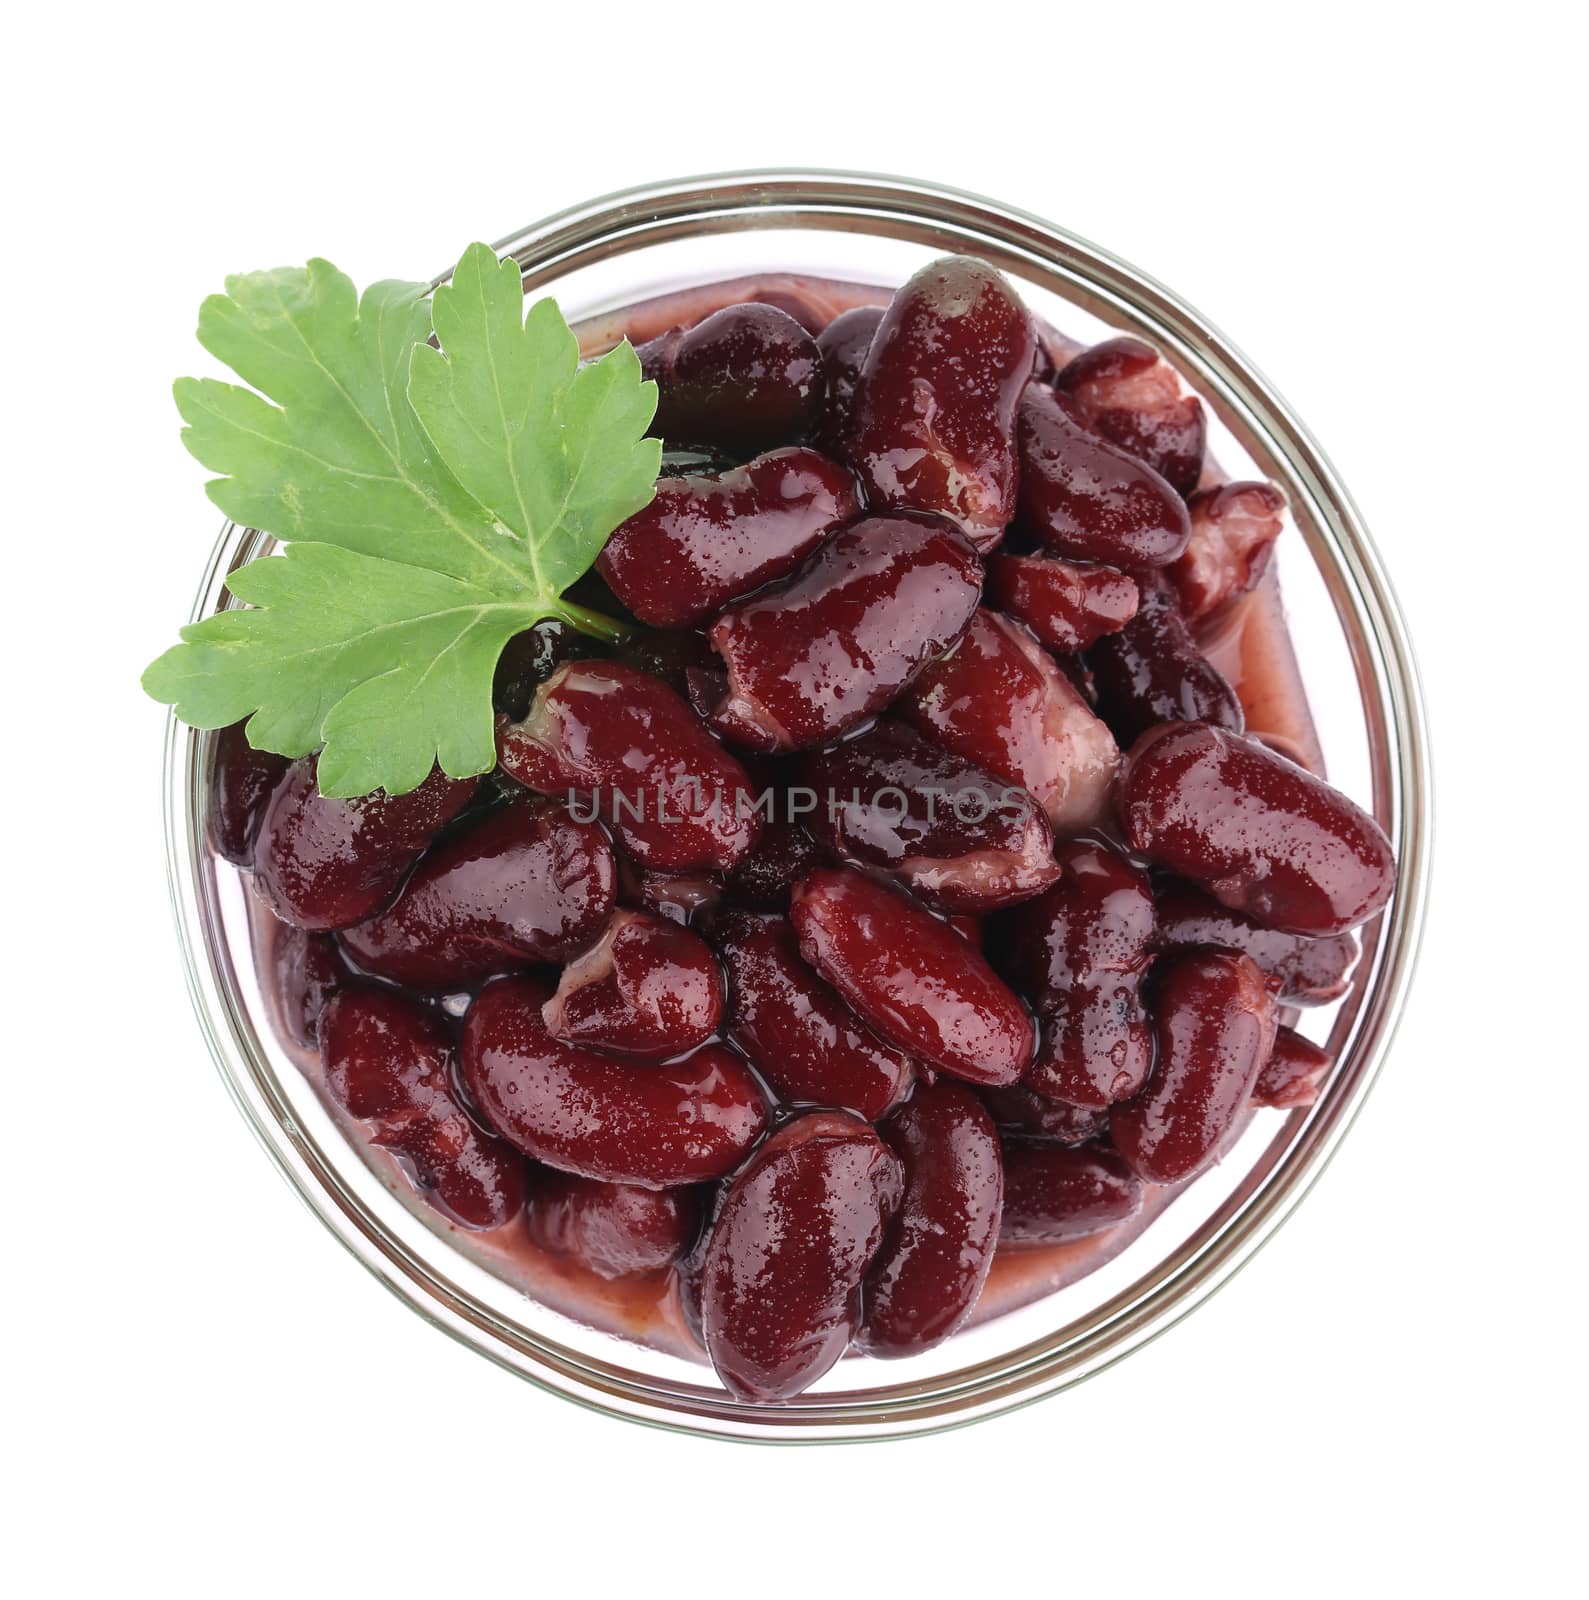 Red bean in glass dish. Isolated on a white background.